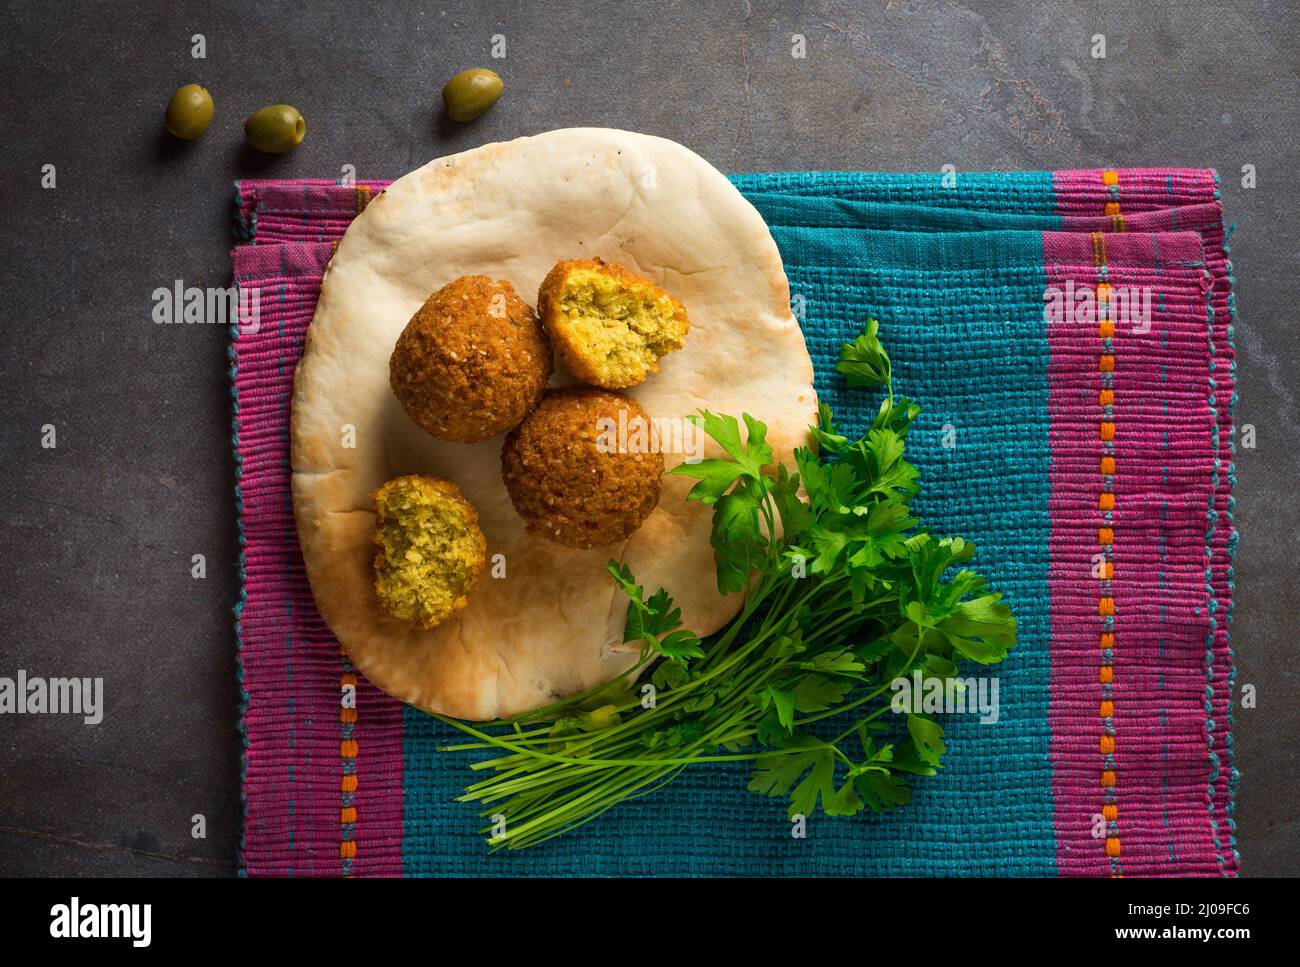 Popular Middle eastern street food- Falafel and kuboos. Top view of delicious fried Falafil placed on the Khuboos or pita bread. Stock Photo